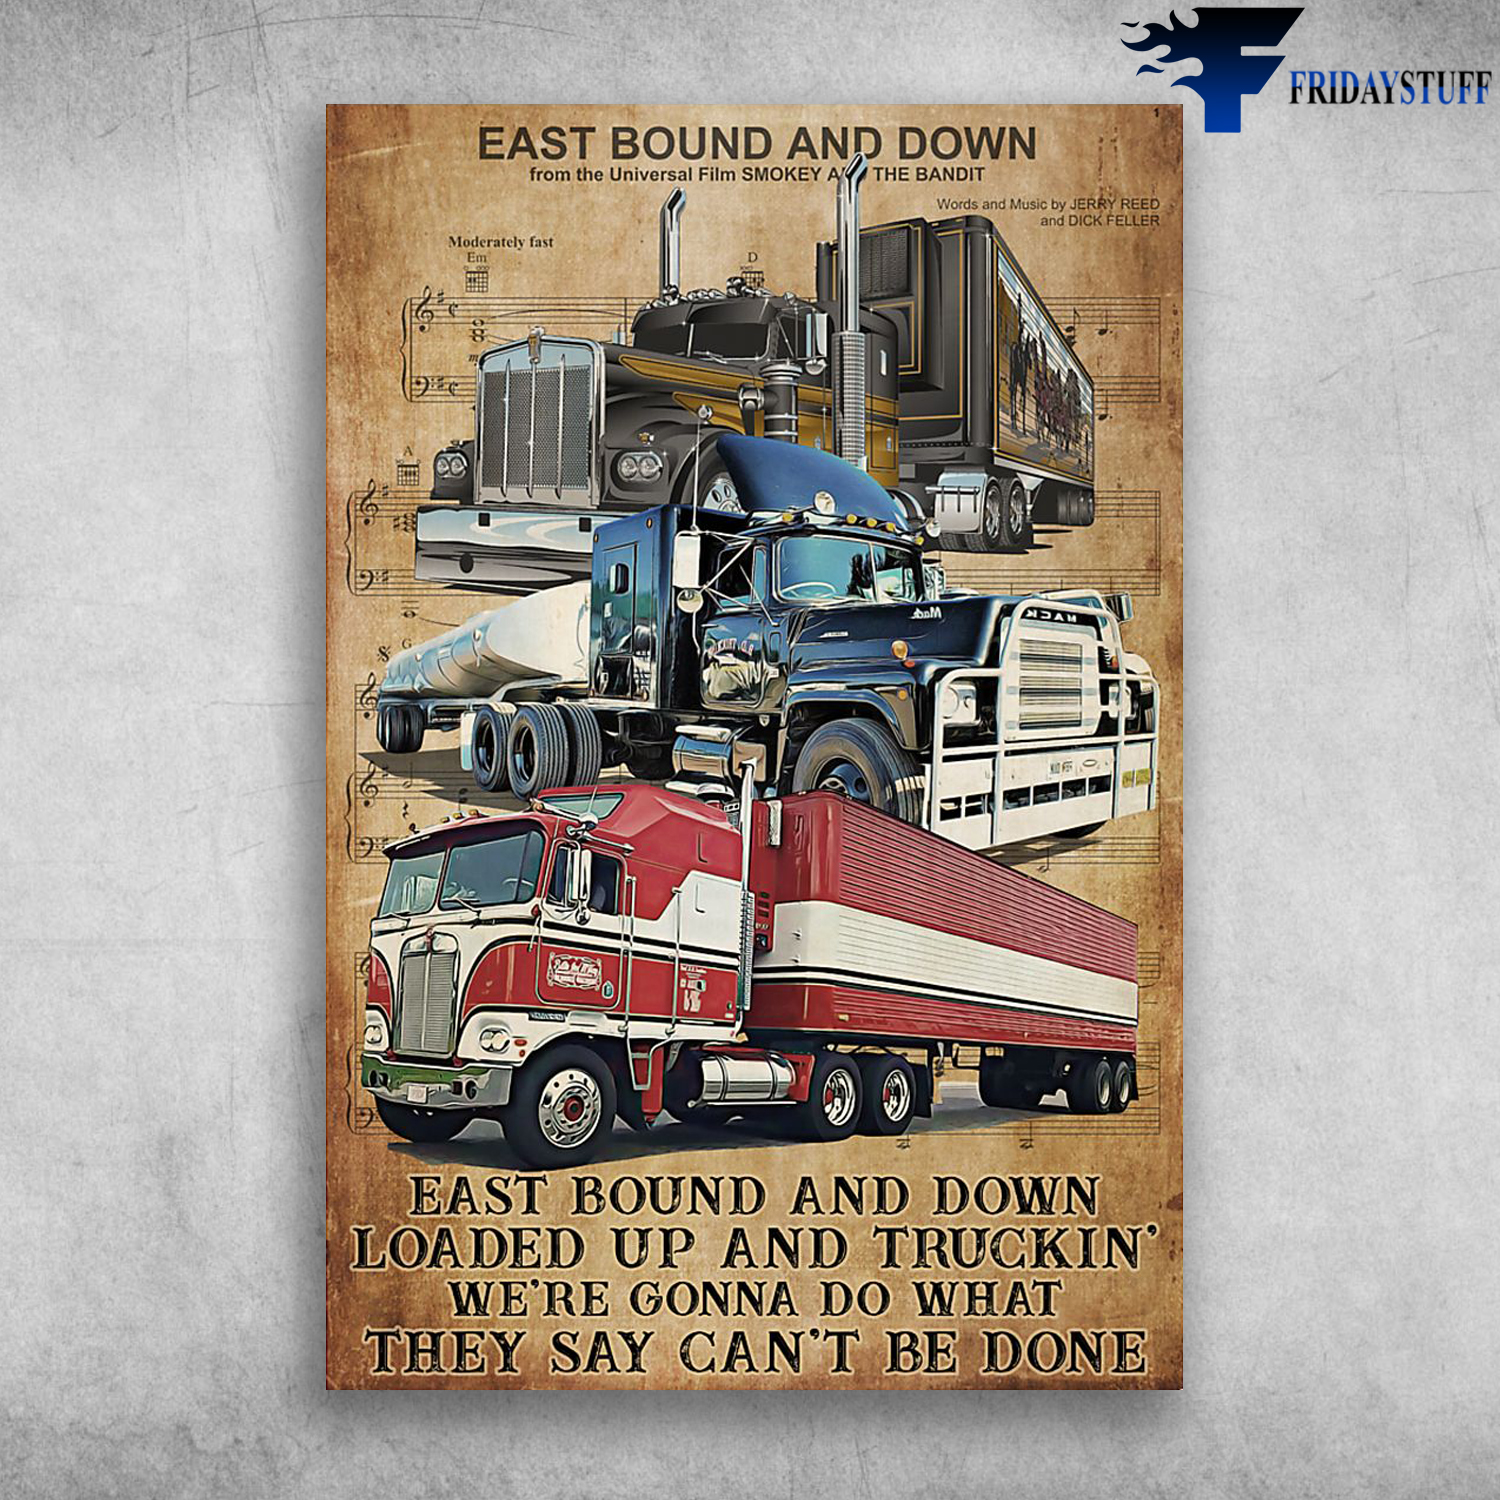 Eastbound And Down Loaded Up And Truckin' - Universal Film Smokey And The The Bandit